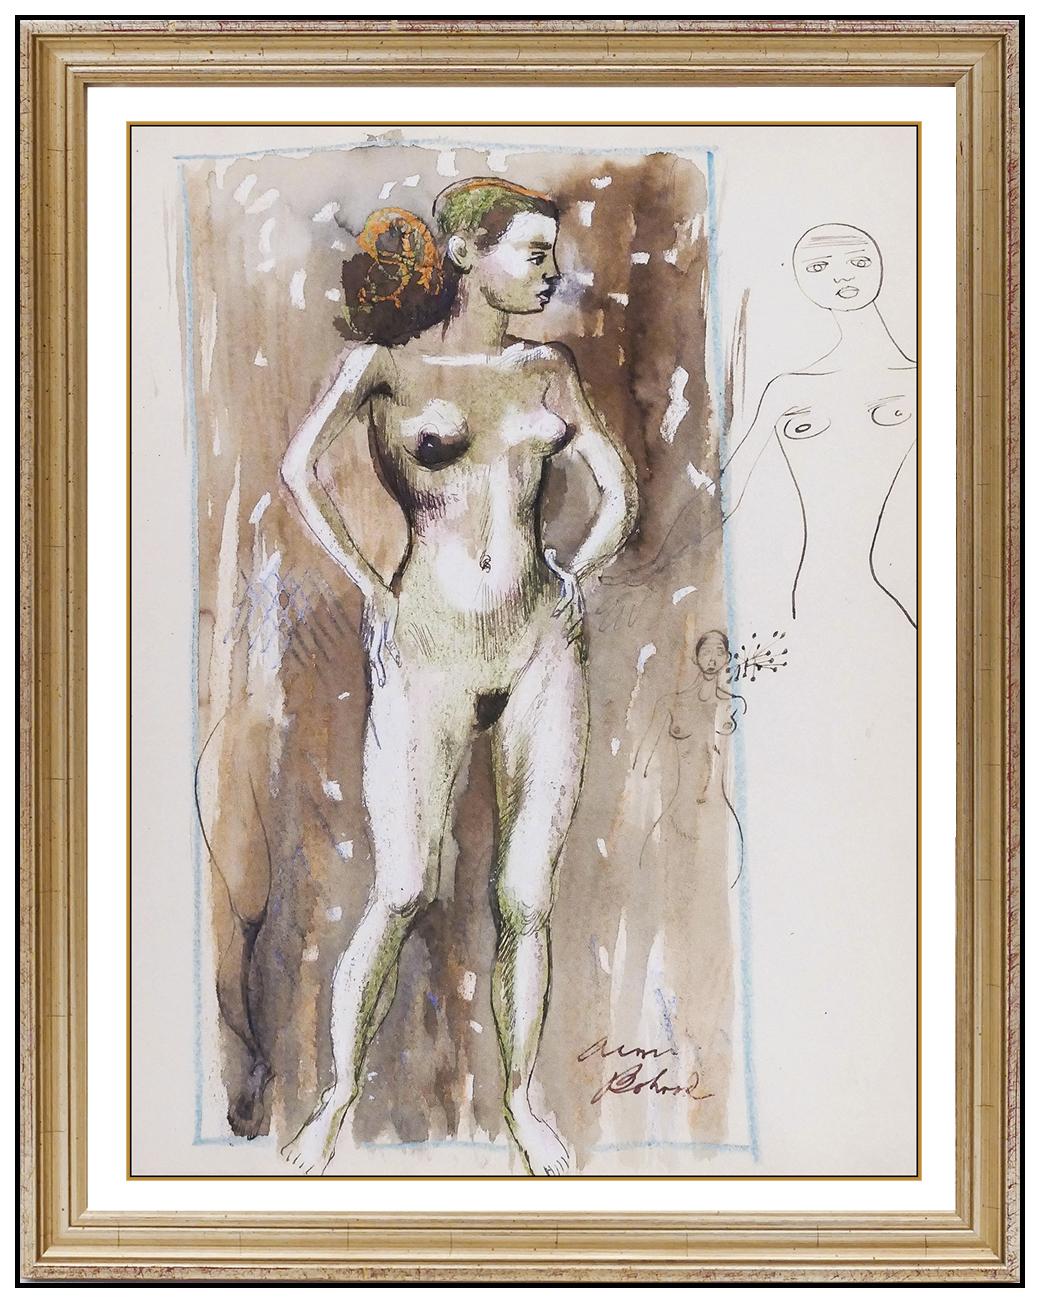 Artist: Aaron Bohrod
Title: Inspiring Original
Medium: Original Ink and Watercolor Painting
Size: 11 x 8.5"
Frame: 18.5 x 18.5"
Published on page 196 of "Aaron Bohrod: Figure Sketches"